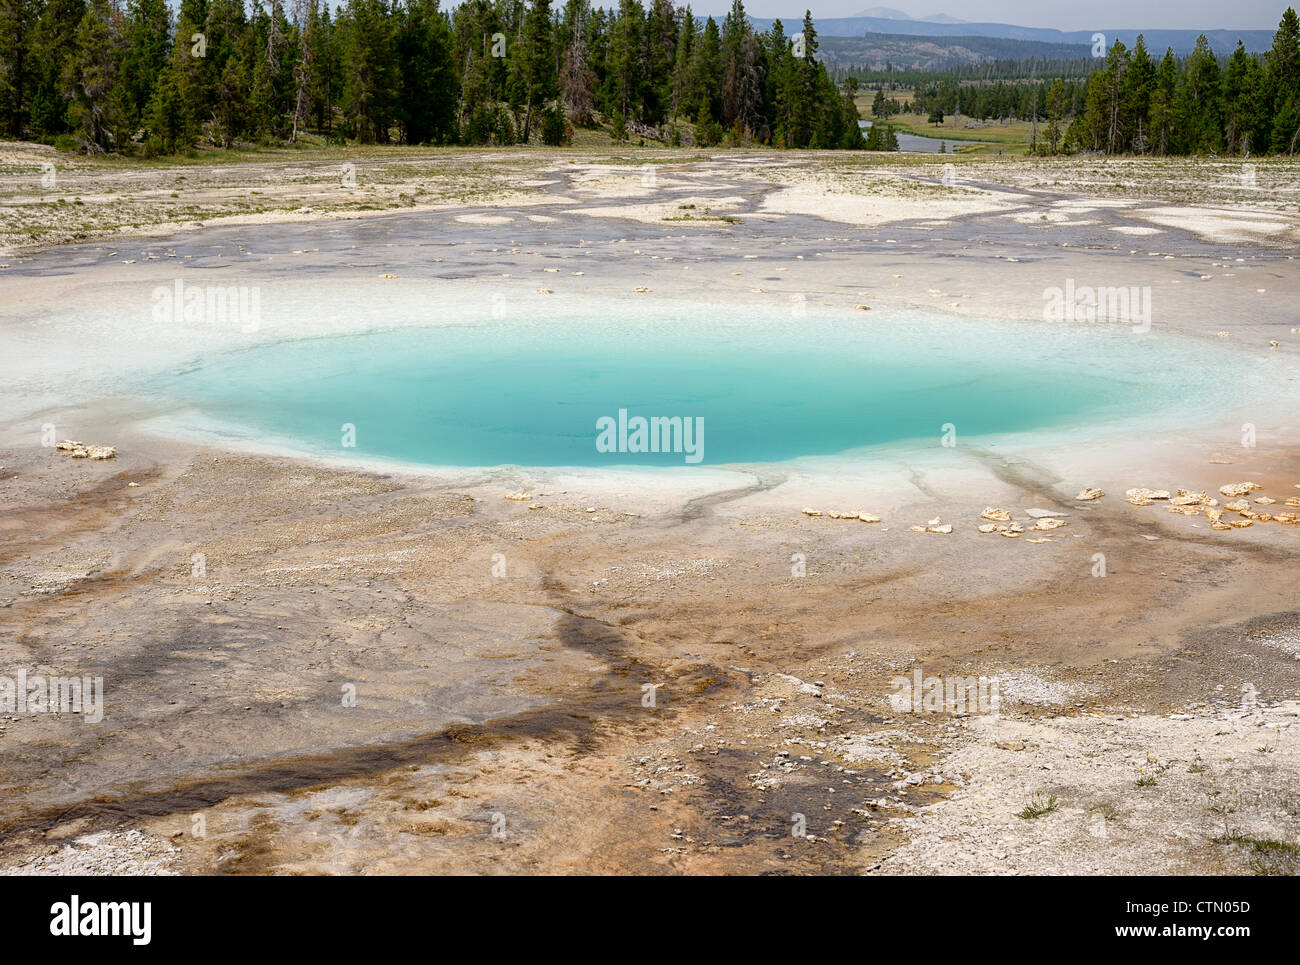 Opal pool and abstract patterns in mud, Midway Geyser Basin, Yellowstone National Park, Wyoming, USA Stock Photo